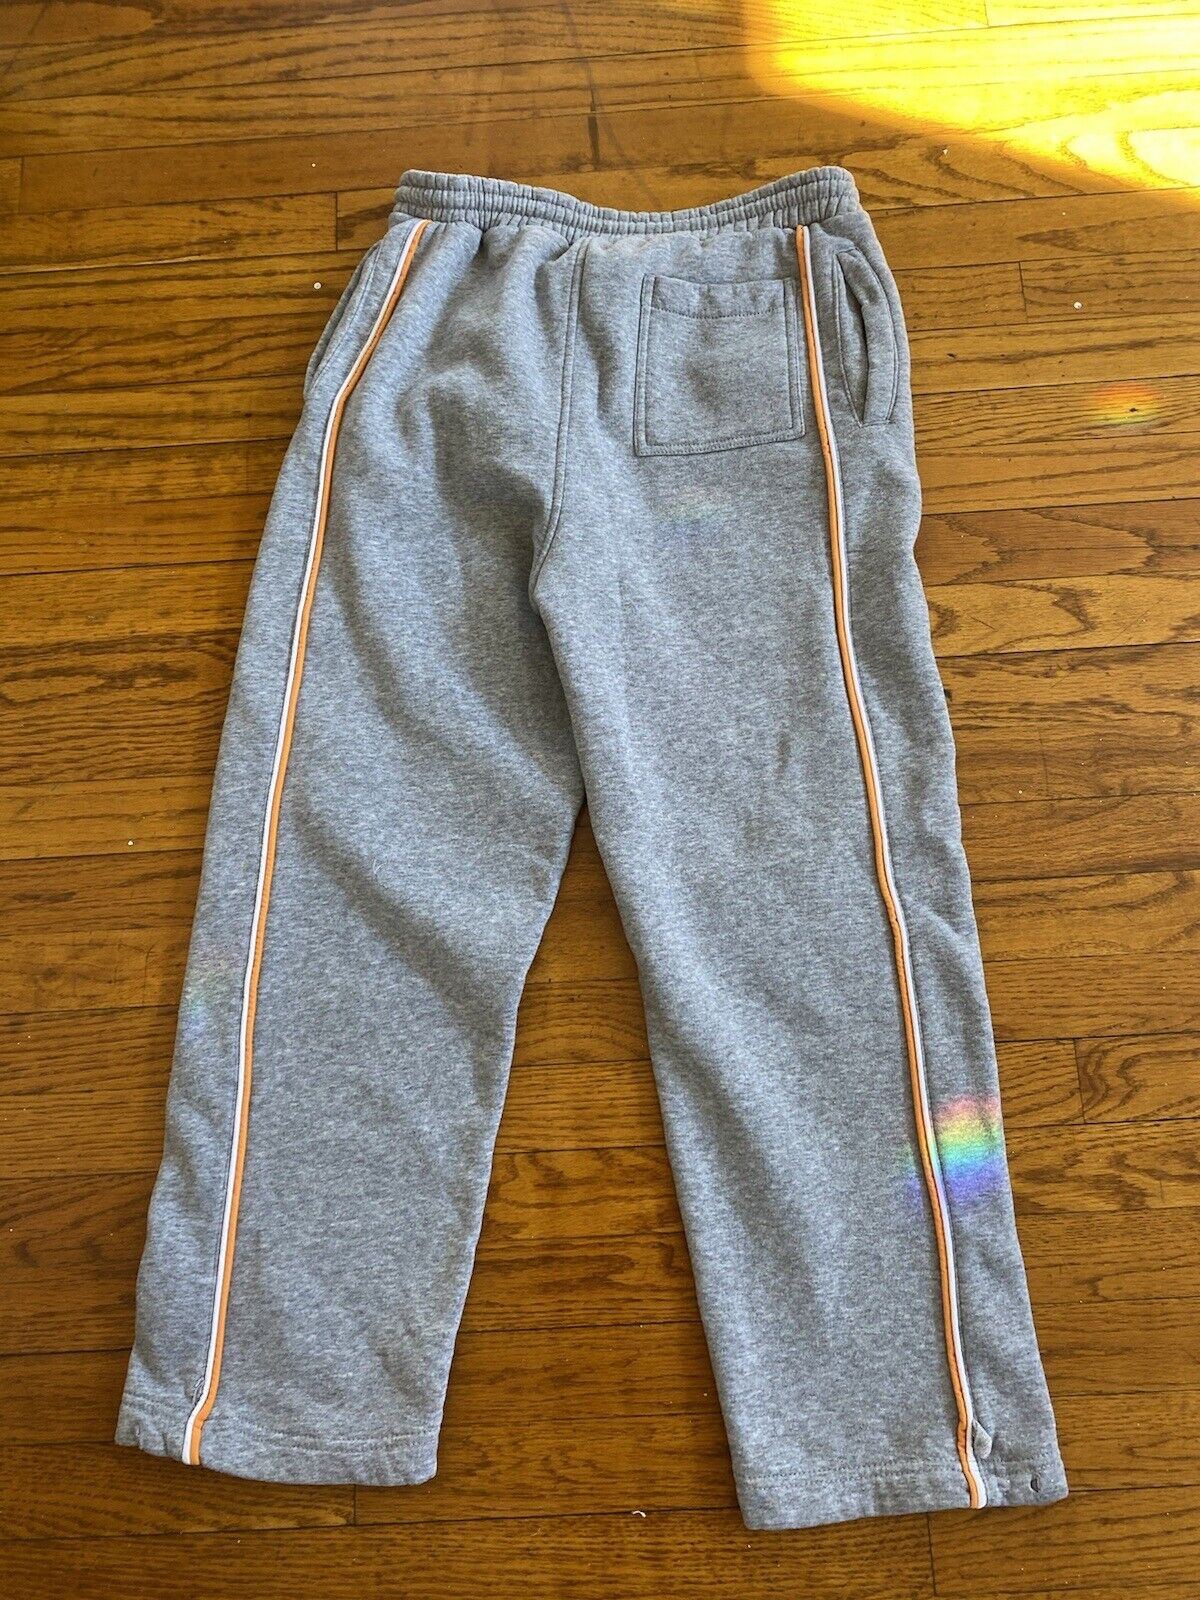 Gray Sweatpants - Unbranded - Size XS